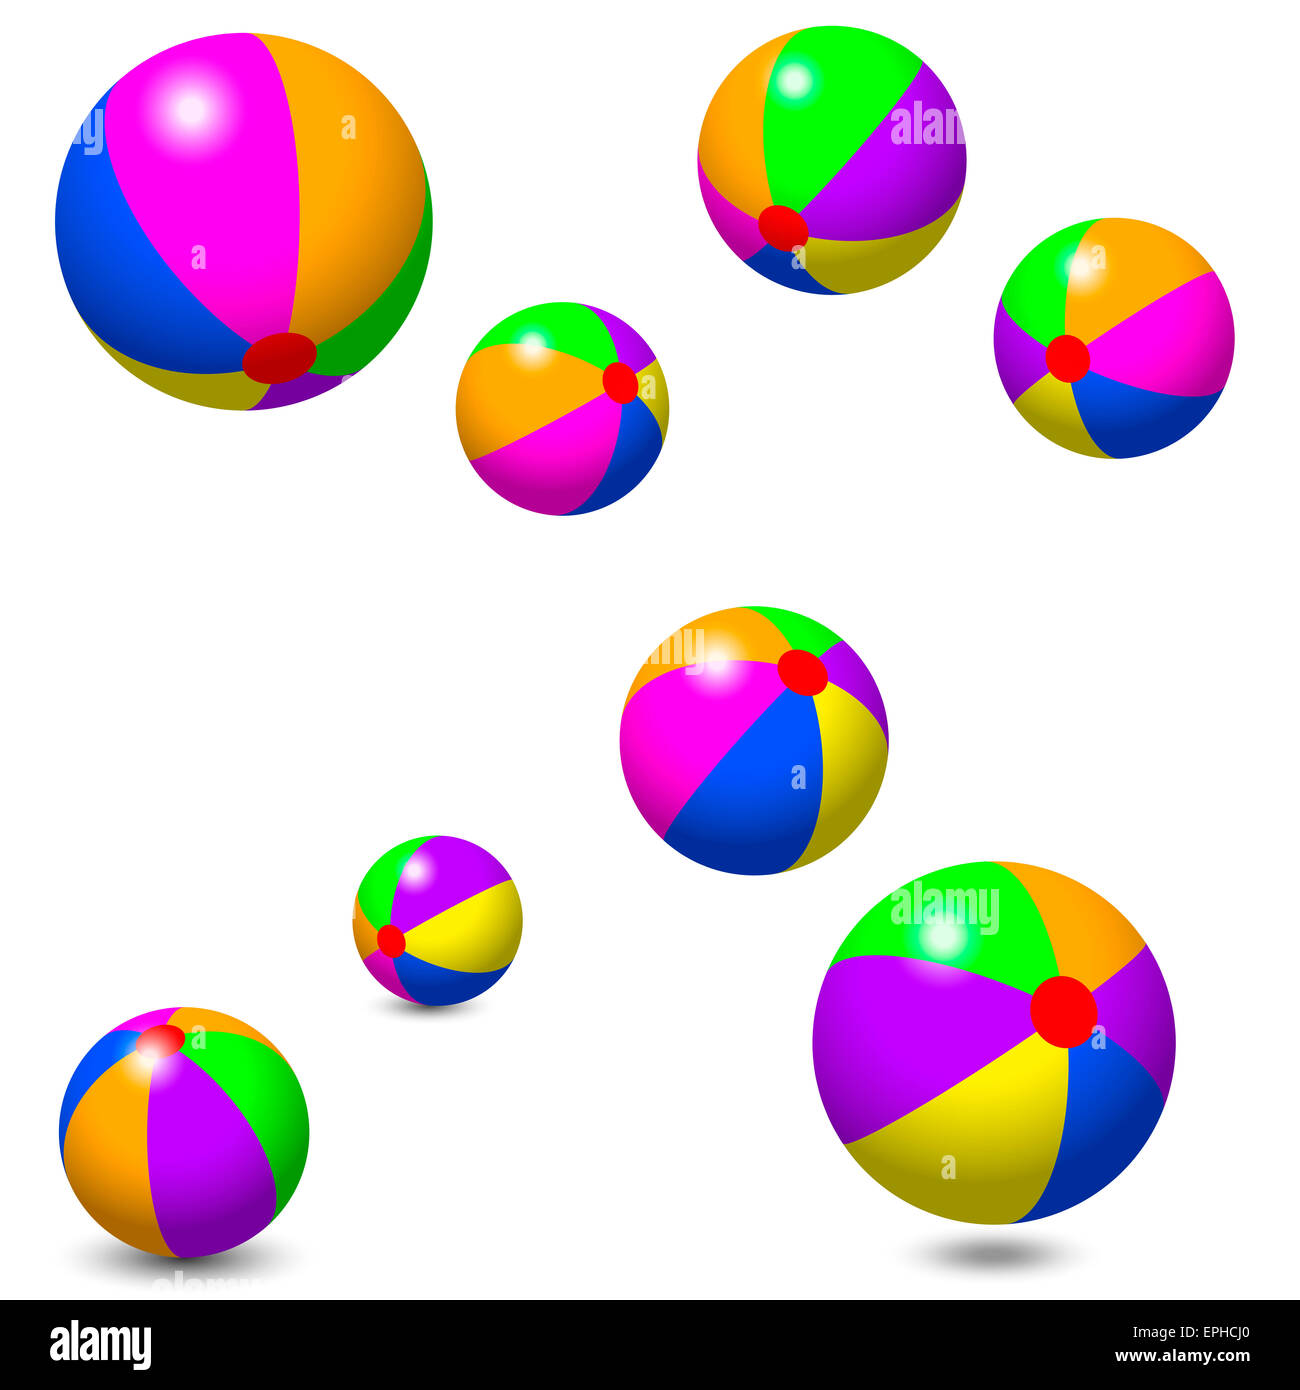 Eight colorful beach balls isolated on white background. Illustration. Stock Photo